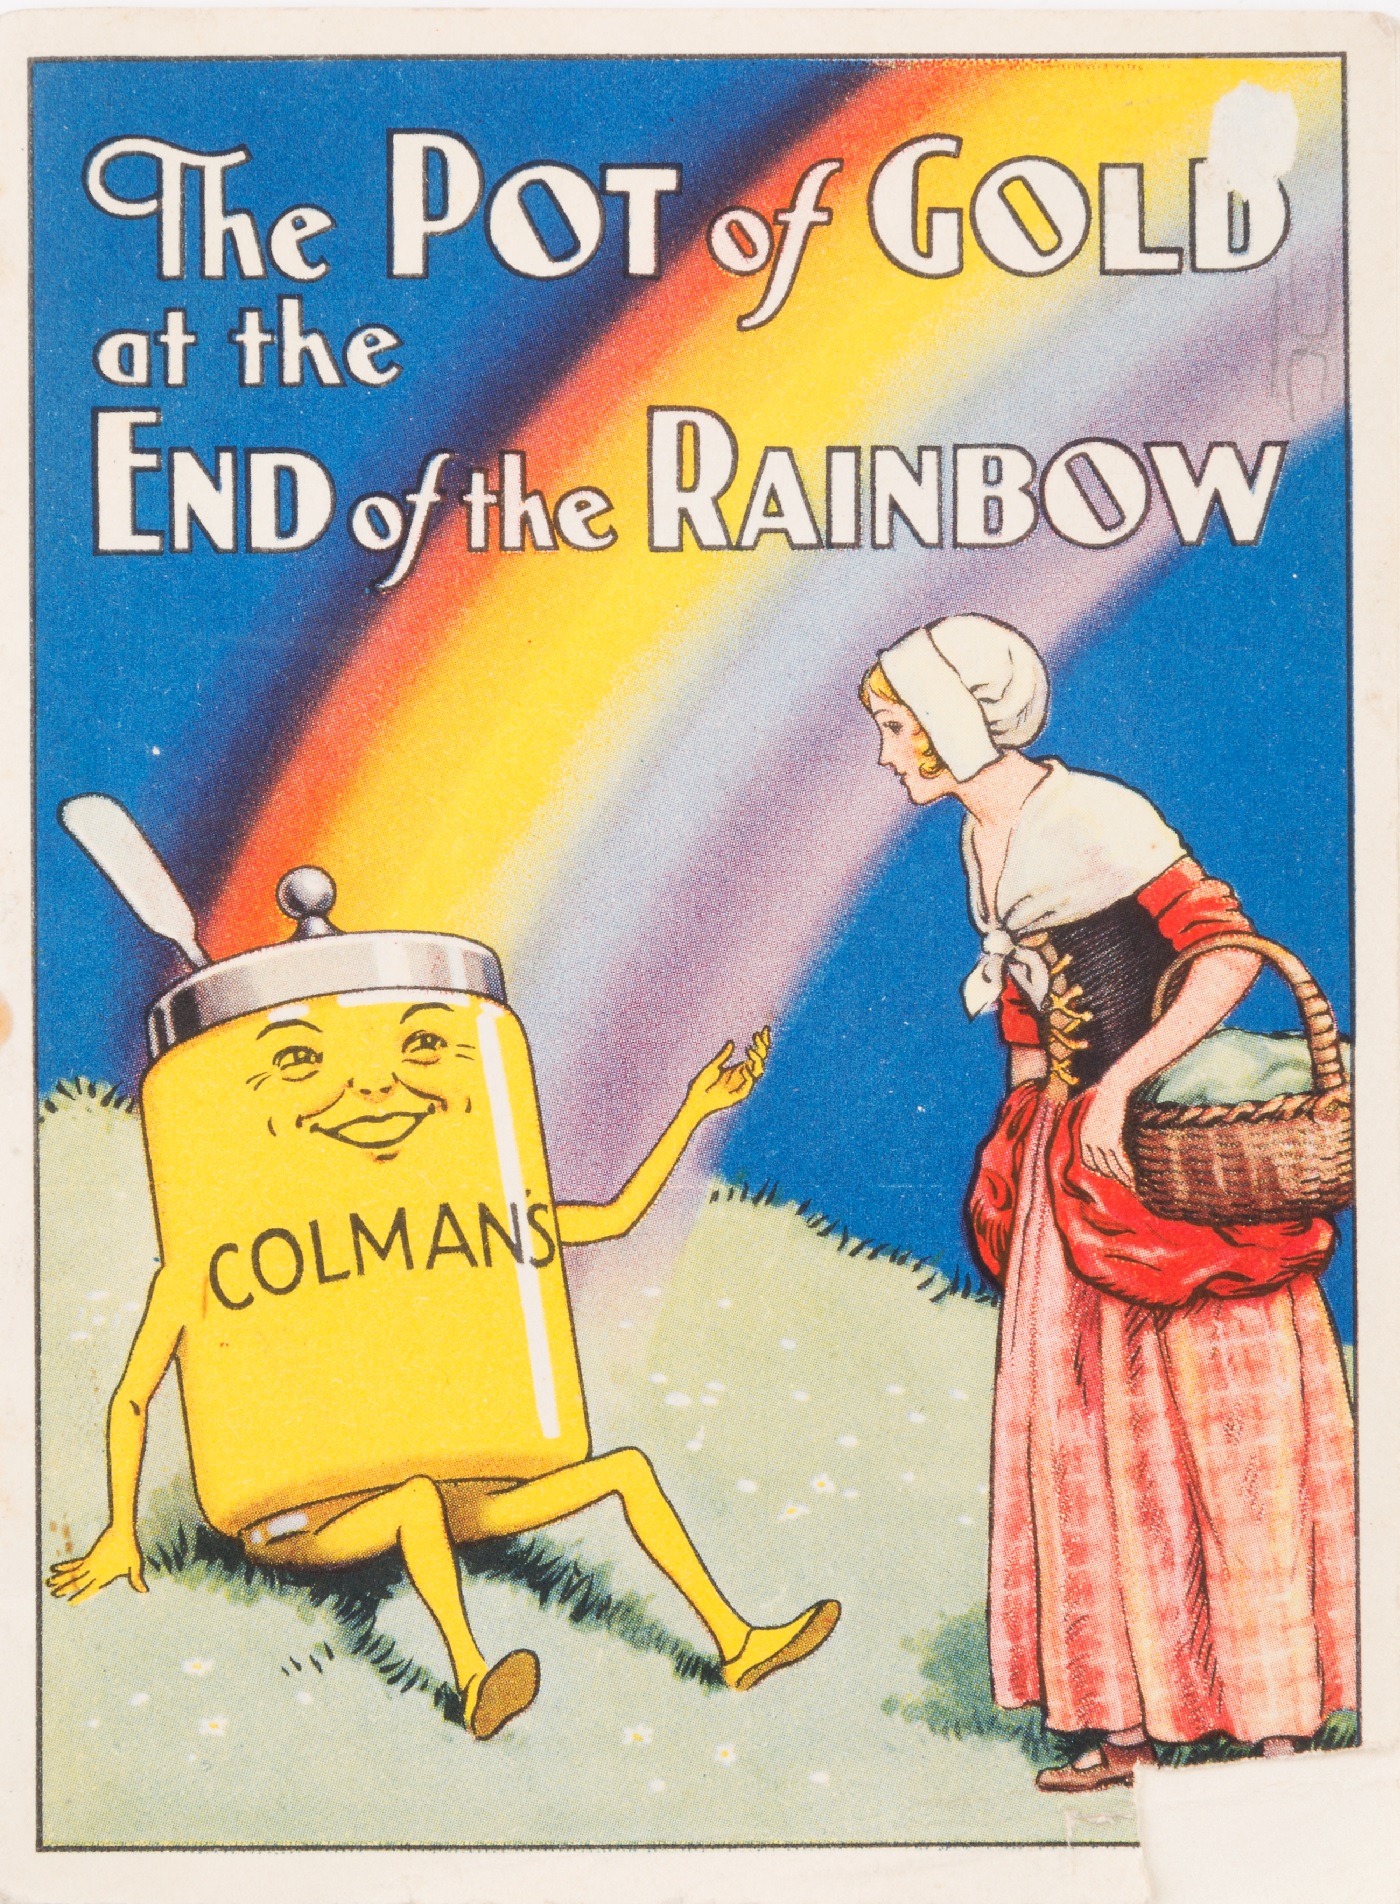 Paperback book entitled 'The Pot of Gold at the end of the Rainbow' with advertisements for Colman's produced on the back, c.1970s.